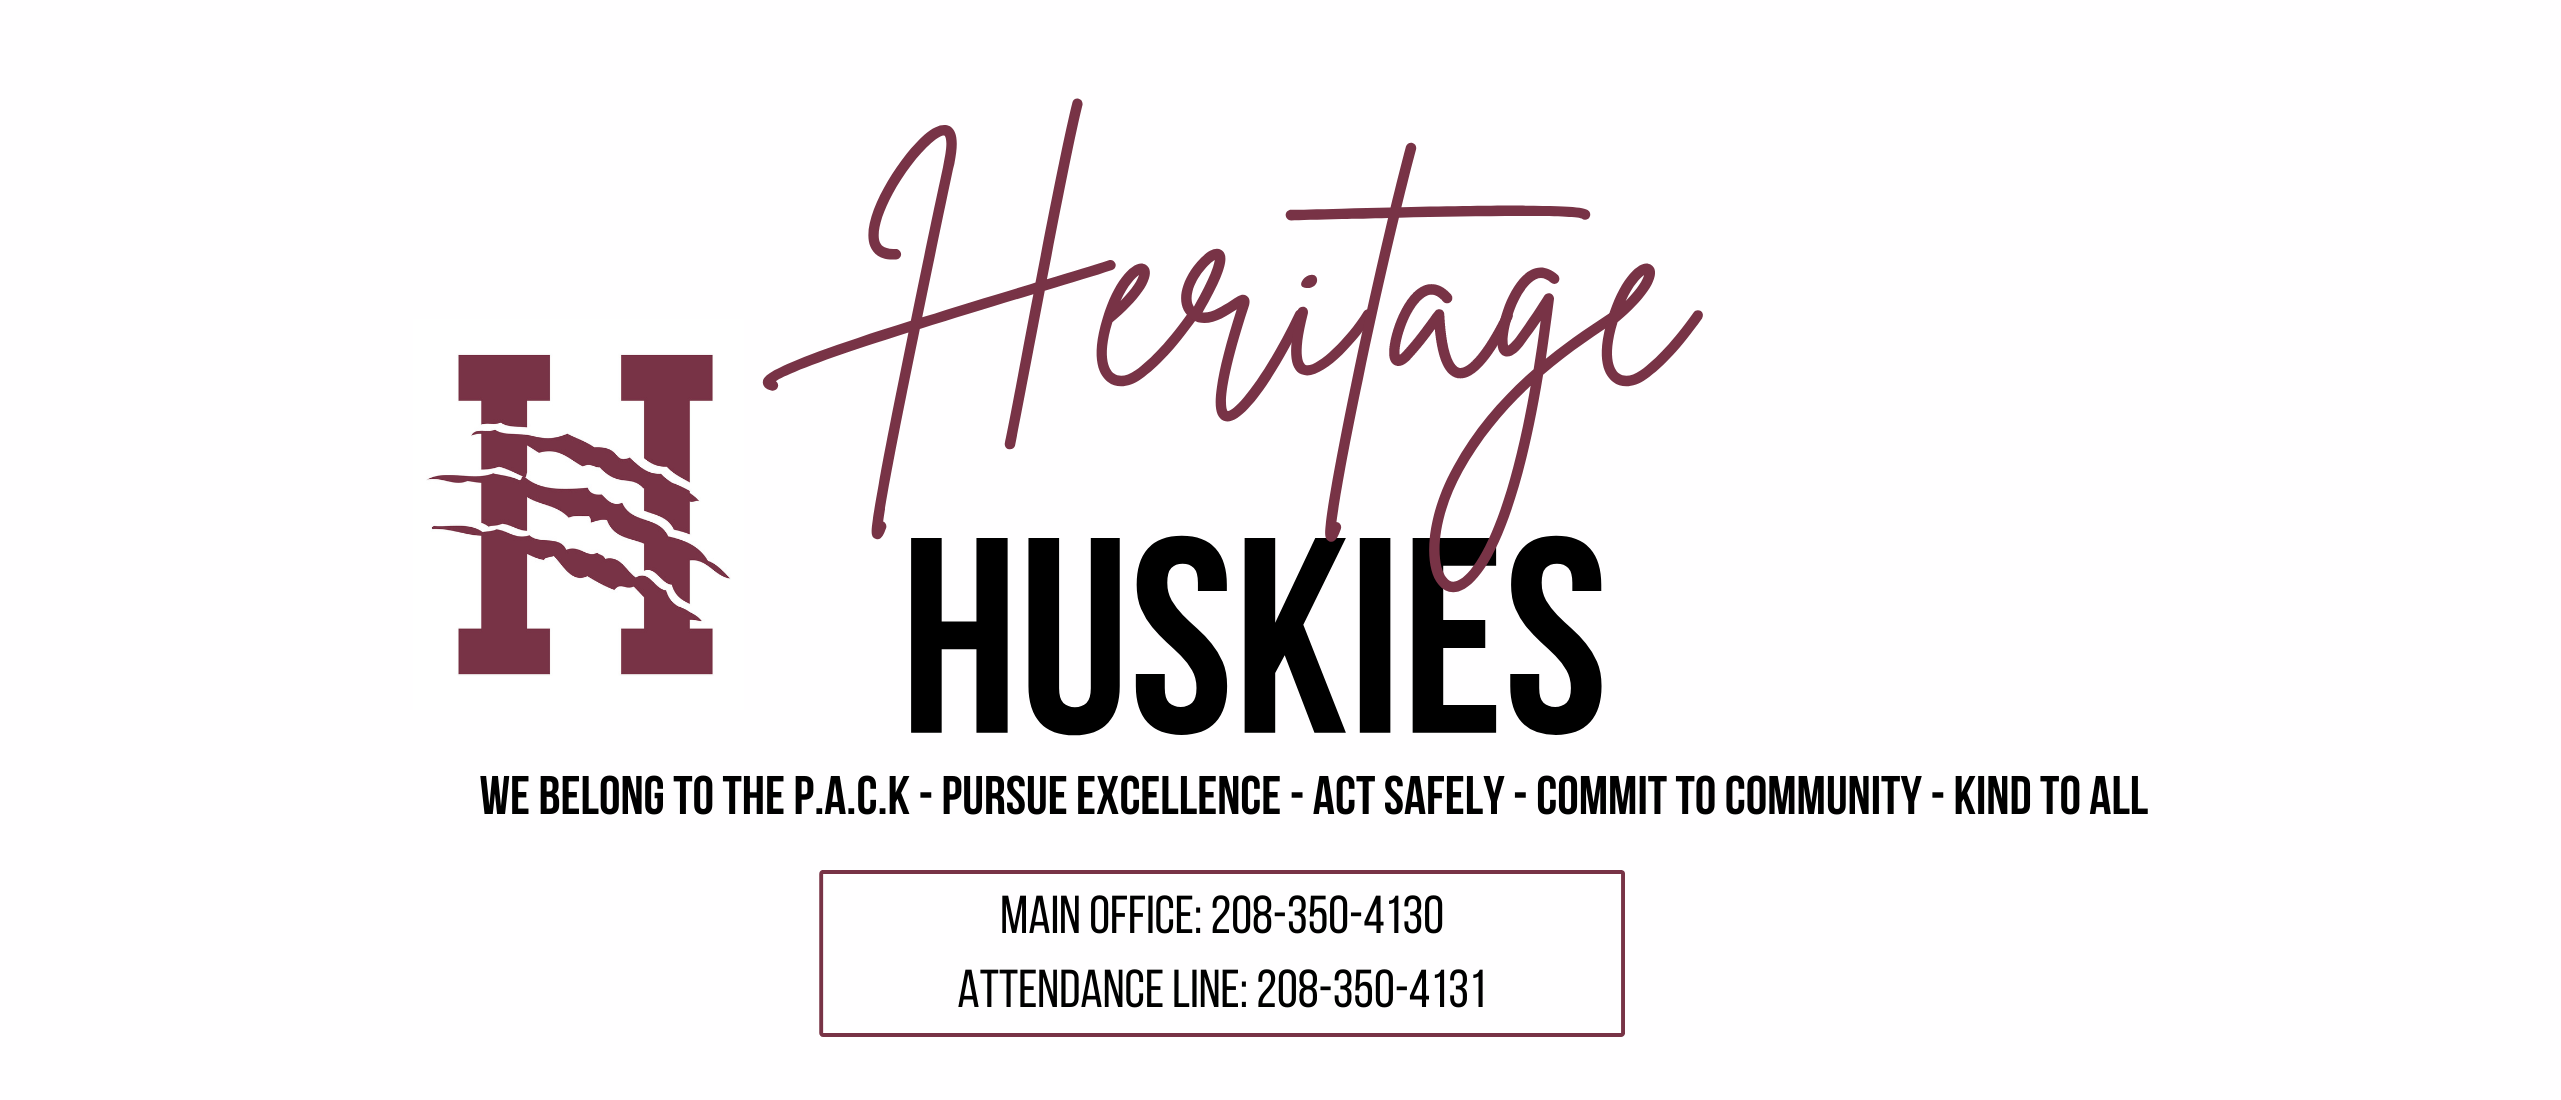 Heritage Huskies Home of the Pack